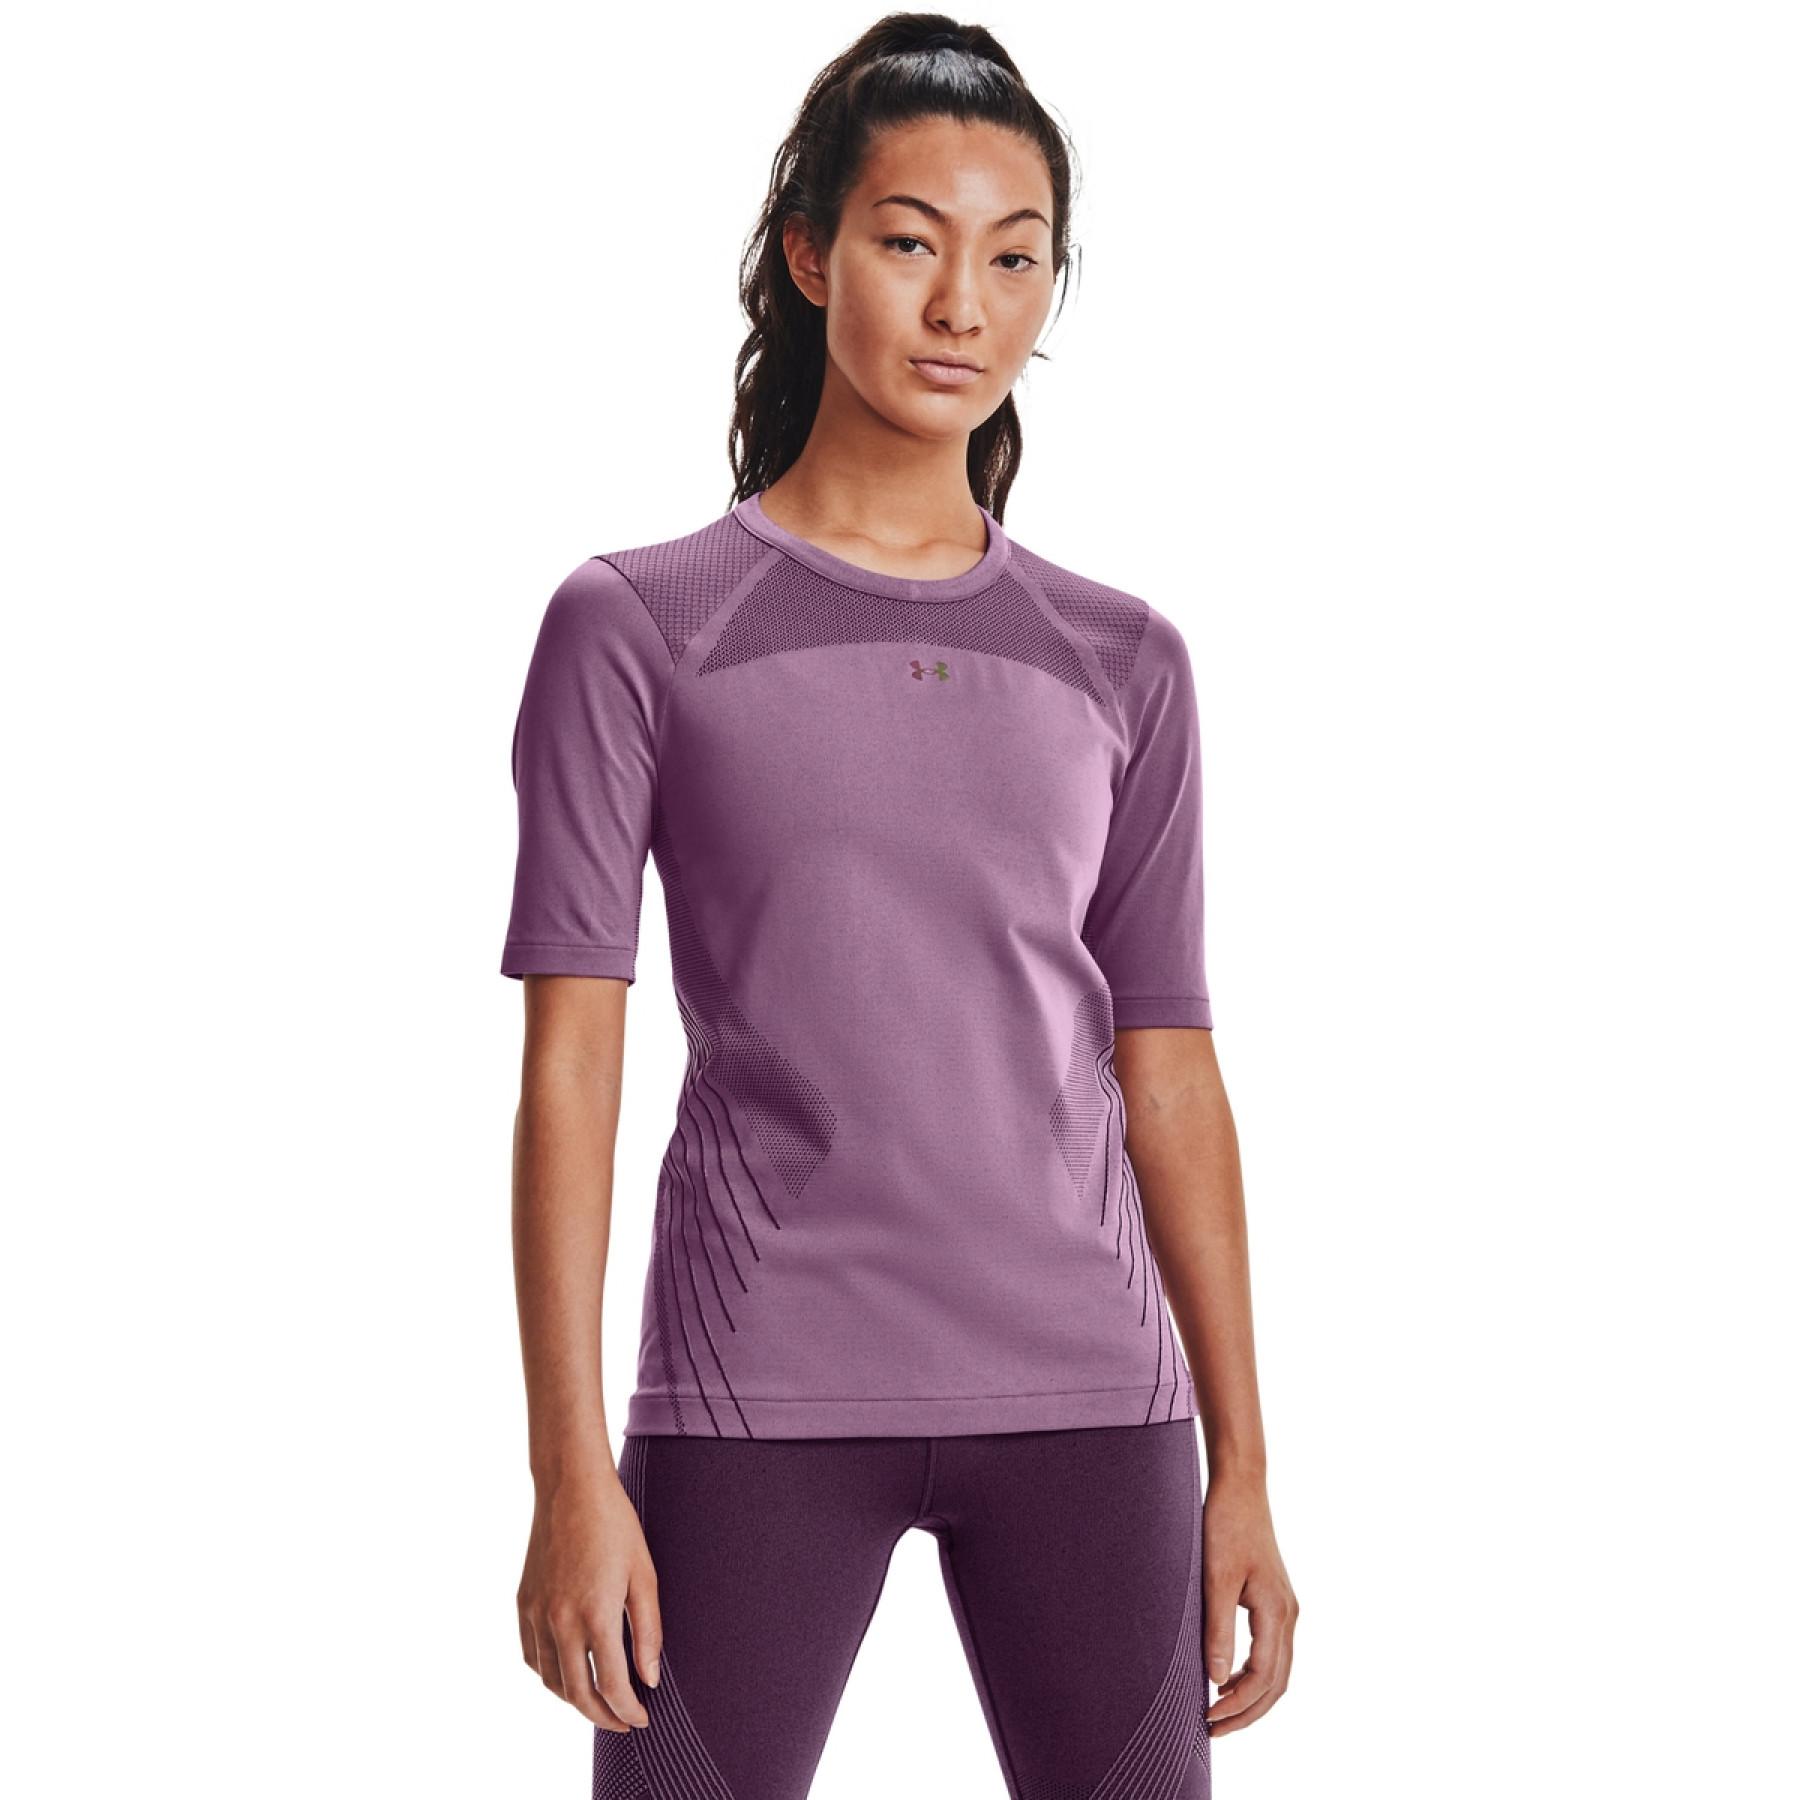 Women's jersey Under Armour à manches courtes rush Seamless